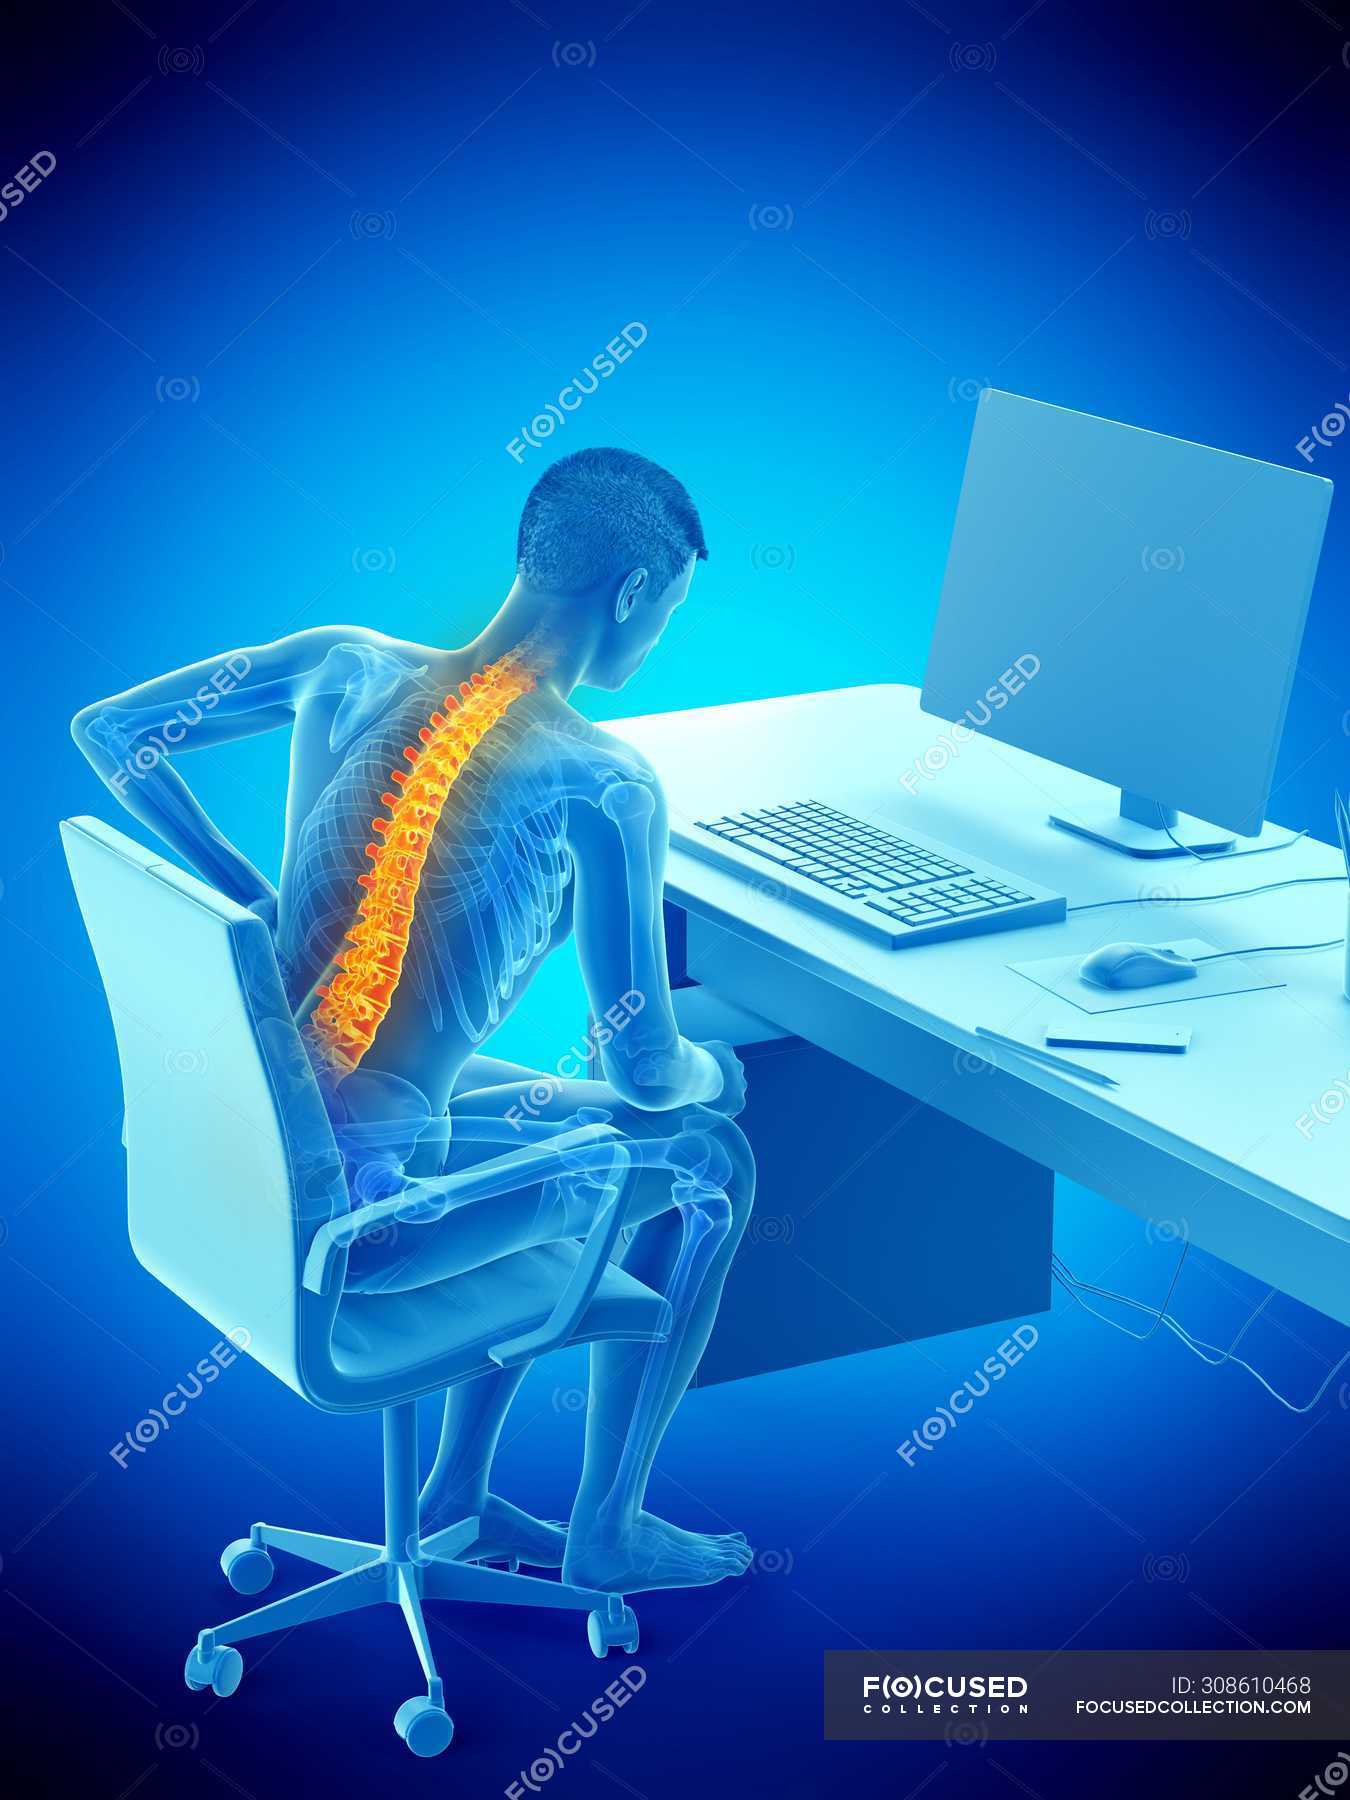 Silhouette of office worker with back pain due to sitting, conceptual  illustration. — anatomical, skeletal system - Stock Photo | #308610468